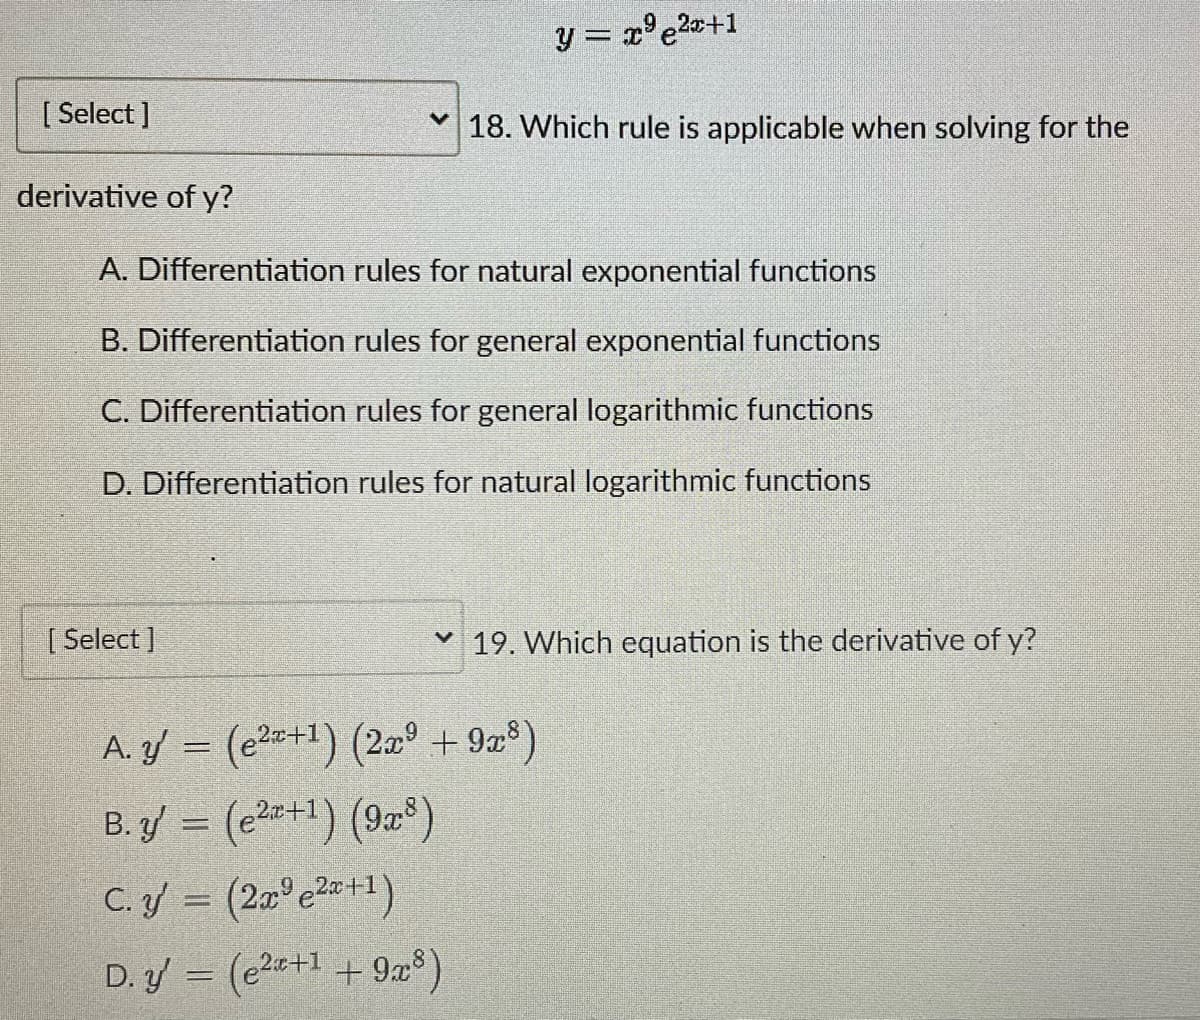 [Select]
derivative of y?
y = x²e²x+1
18. Which rule is applicable when solving for the
A. Differentiation rules for natural exponential functions
B. Differentiation rules for general exponential functions
C. Differentiation rules for general logarithmic functions
D. Differentiation rules for natural logarithmic functions
[Select]
A. y = (²+¹) (2x +9x³)
B.y = (²+1) (98)
C. ý = (2 e2+1)
D. y' = (²+1 +9x³)
19. Which equation is the derivative of y?